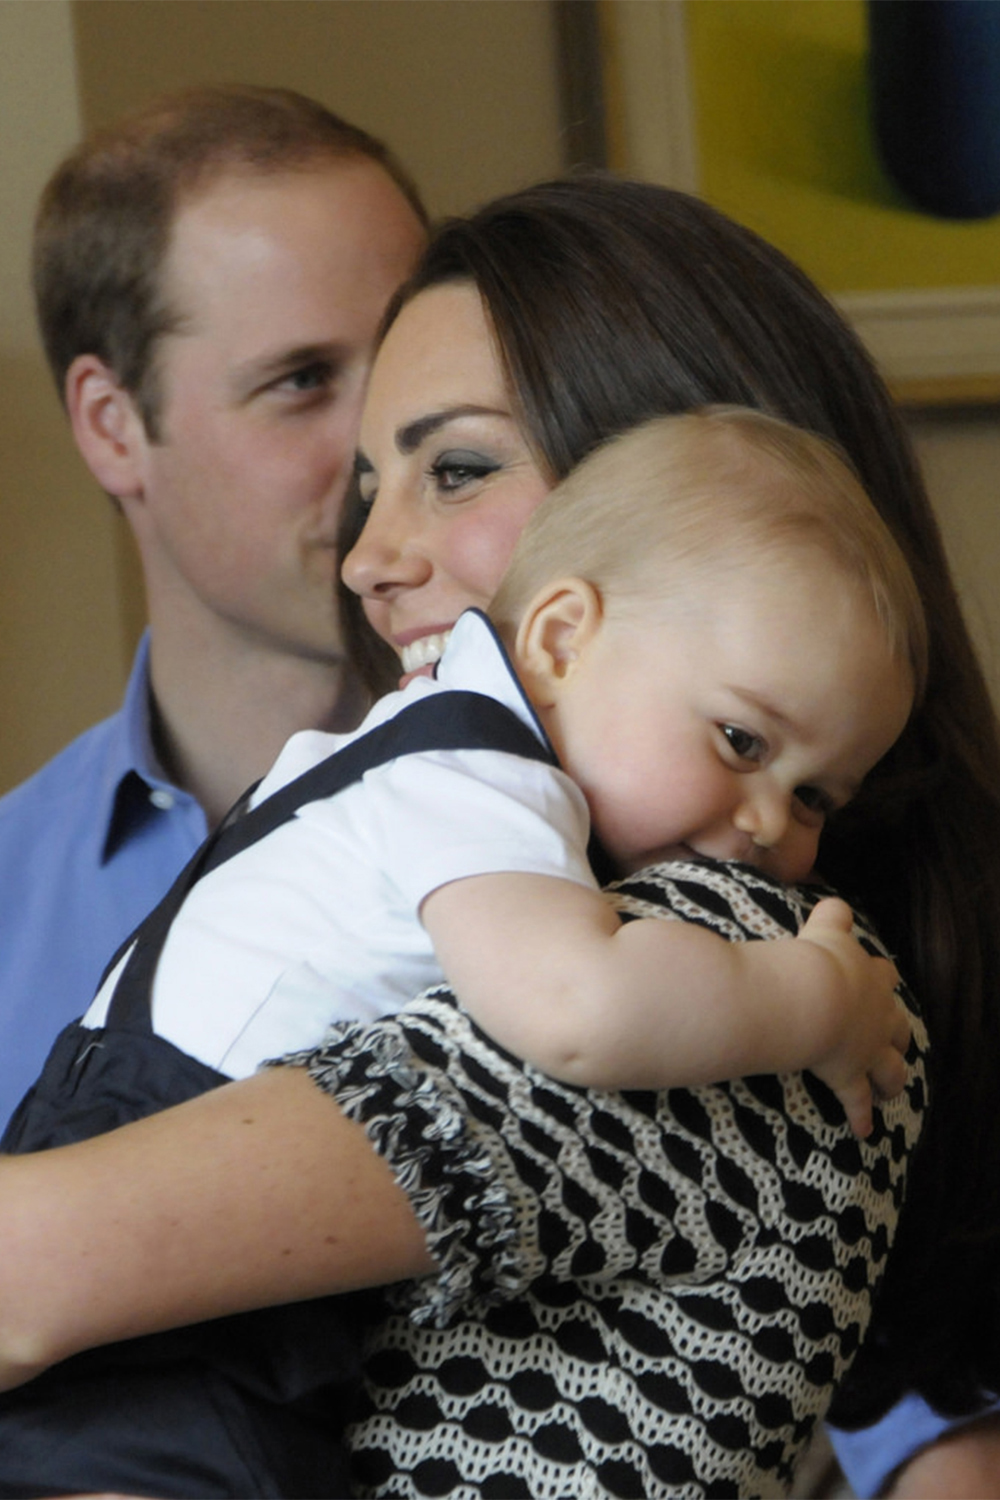 Our hearts melted when the little Prince cuddled up to his mother at a Plunkett Parent's Group at Government House on April 9, 2014 in Wellington during the royal tour.